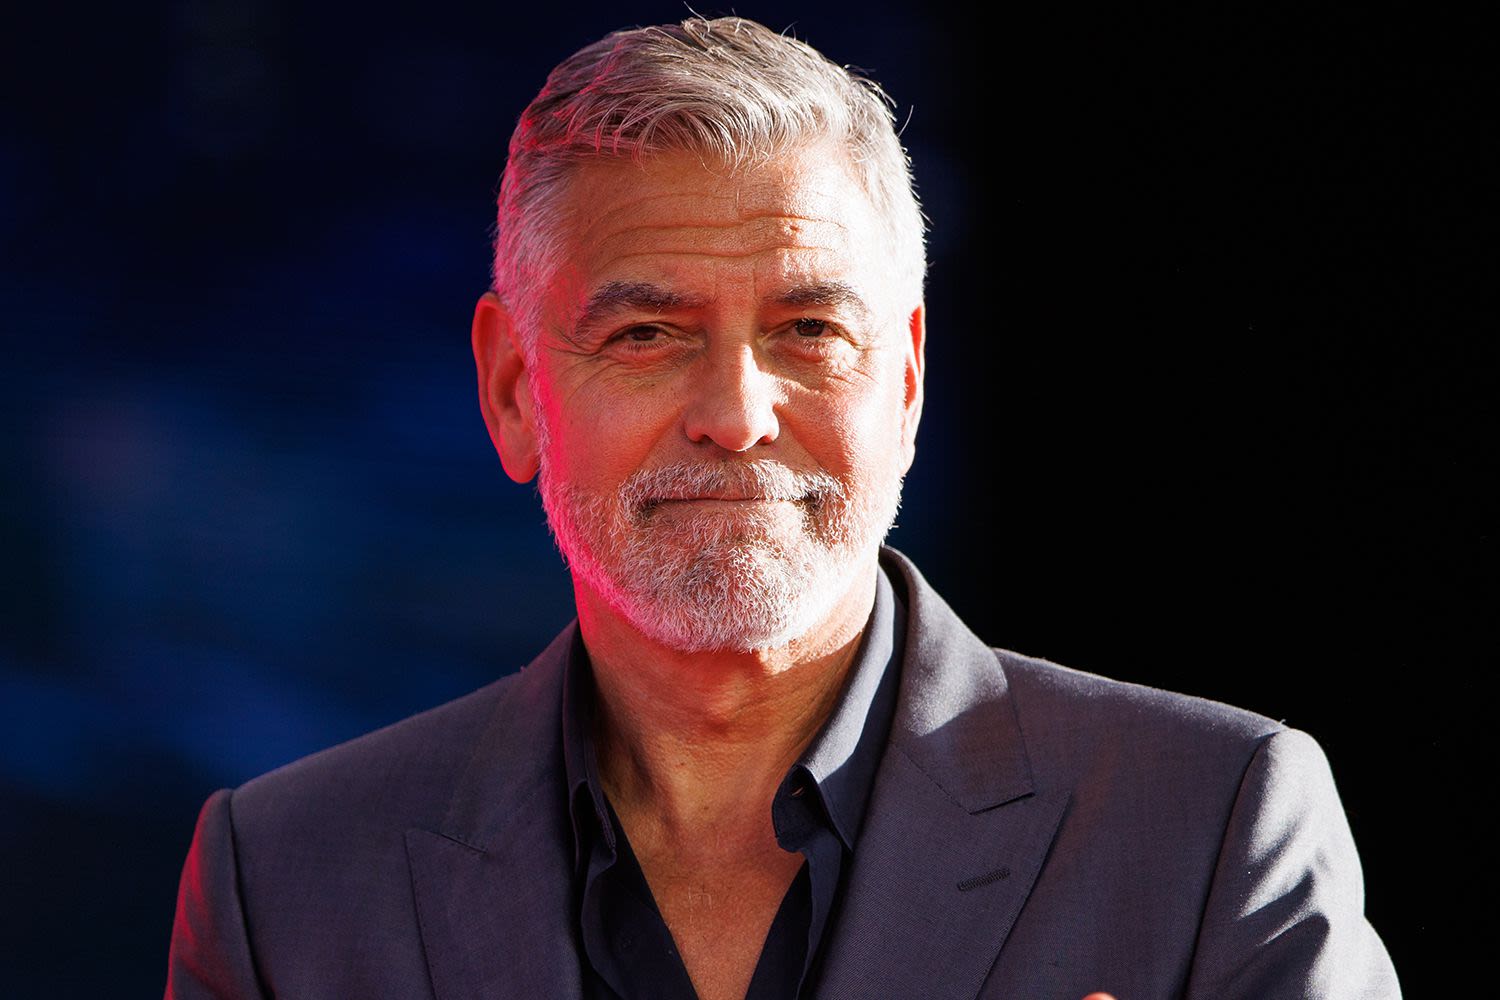 George Clooney to Make Broadway Debut in “Good Night, and Good Luck” Play: 'Every Actor Aspires to' This